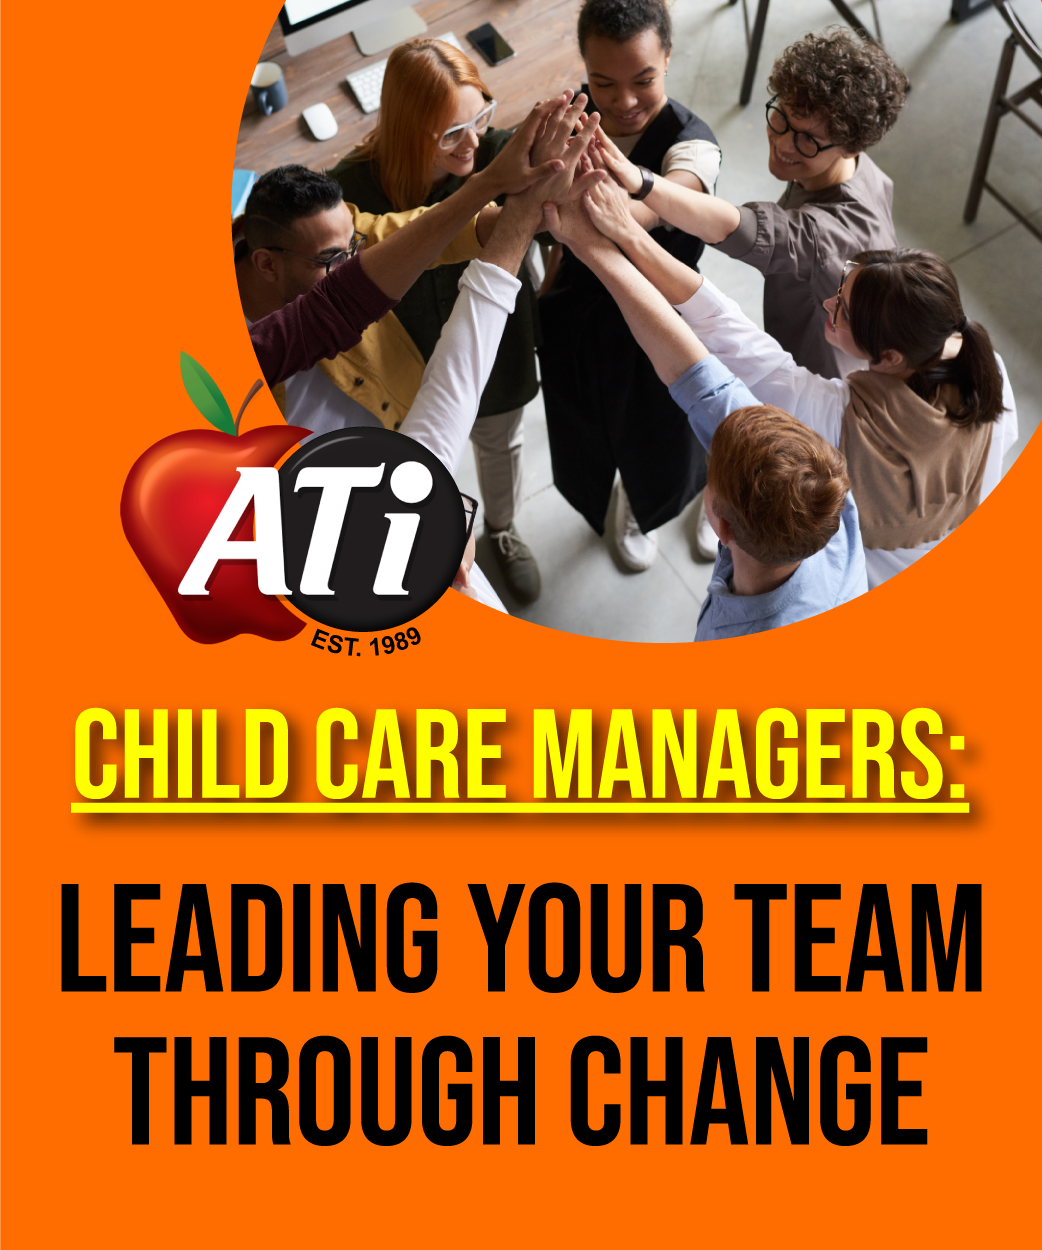 Image for LIVE - Child Care Managers: Leading Your Team Through Change